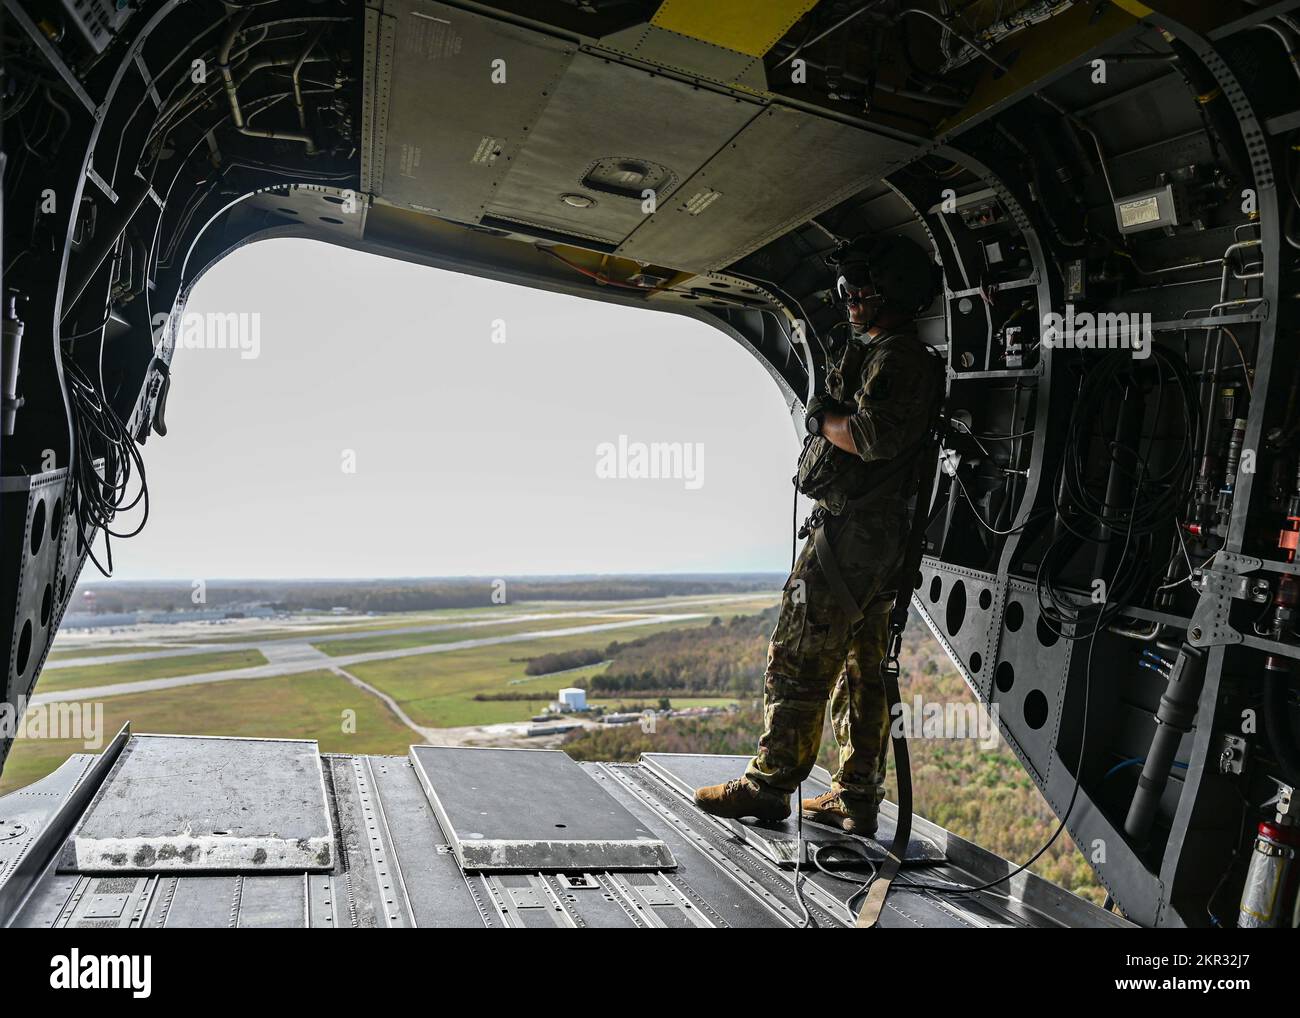 A U.S. Army soldier stands on the rear deck of a U.S. Army CH-47 Chinook as it flies over Naval Air Station, Virginia, while transporting U.S. Air Force Airmen assigned to the 355th Wing during Bushwhacker 22-07, Nov. 5, 2022. The Chinook and its aircrew made multiple trips a day delivering Airmen and equipment to the various simulated contingency locations during the exercise. (U.S. Air Force photo by Airman 1st Class Paige Weldon) Stock Photo